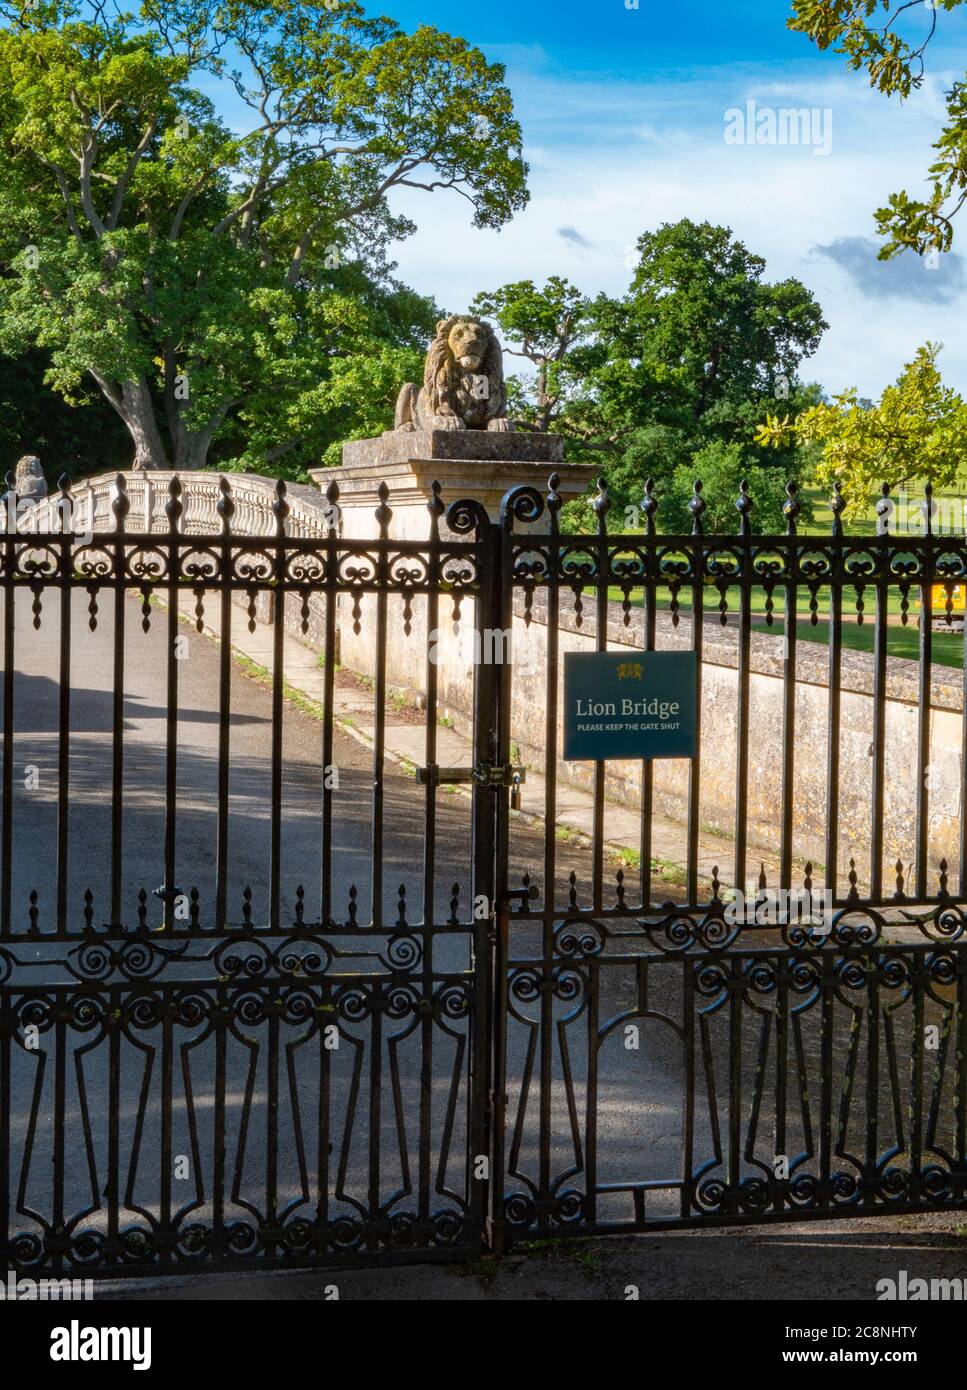 Lion Bridge and its iron gates. An 18th century, stone built crossing over the lake on the Burghley House estate. Stamford, Lincolnshire, England, UK. Stock Photo